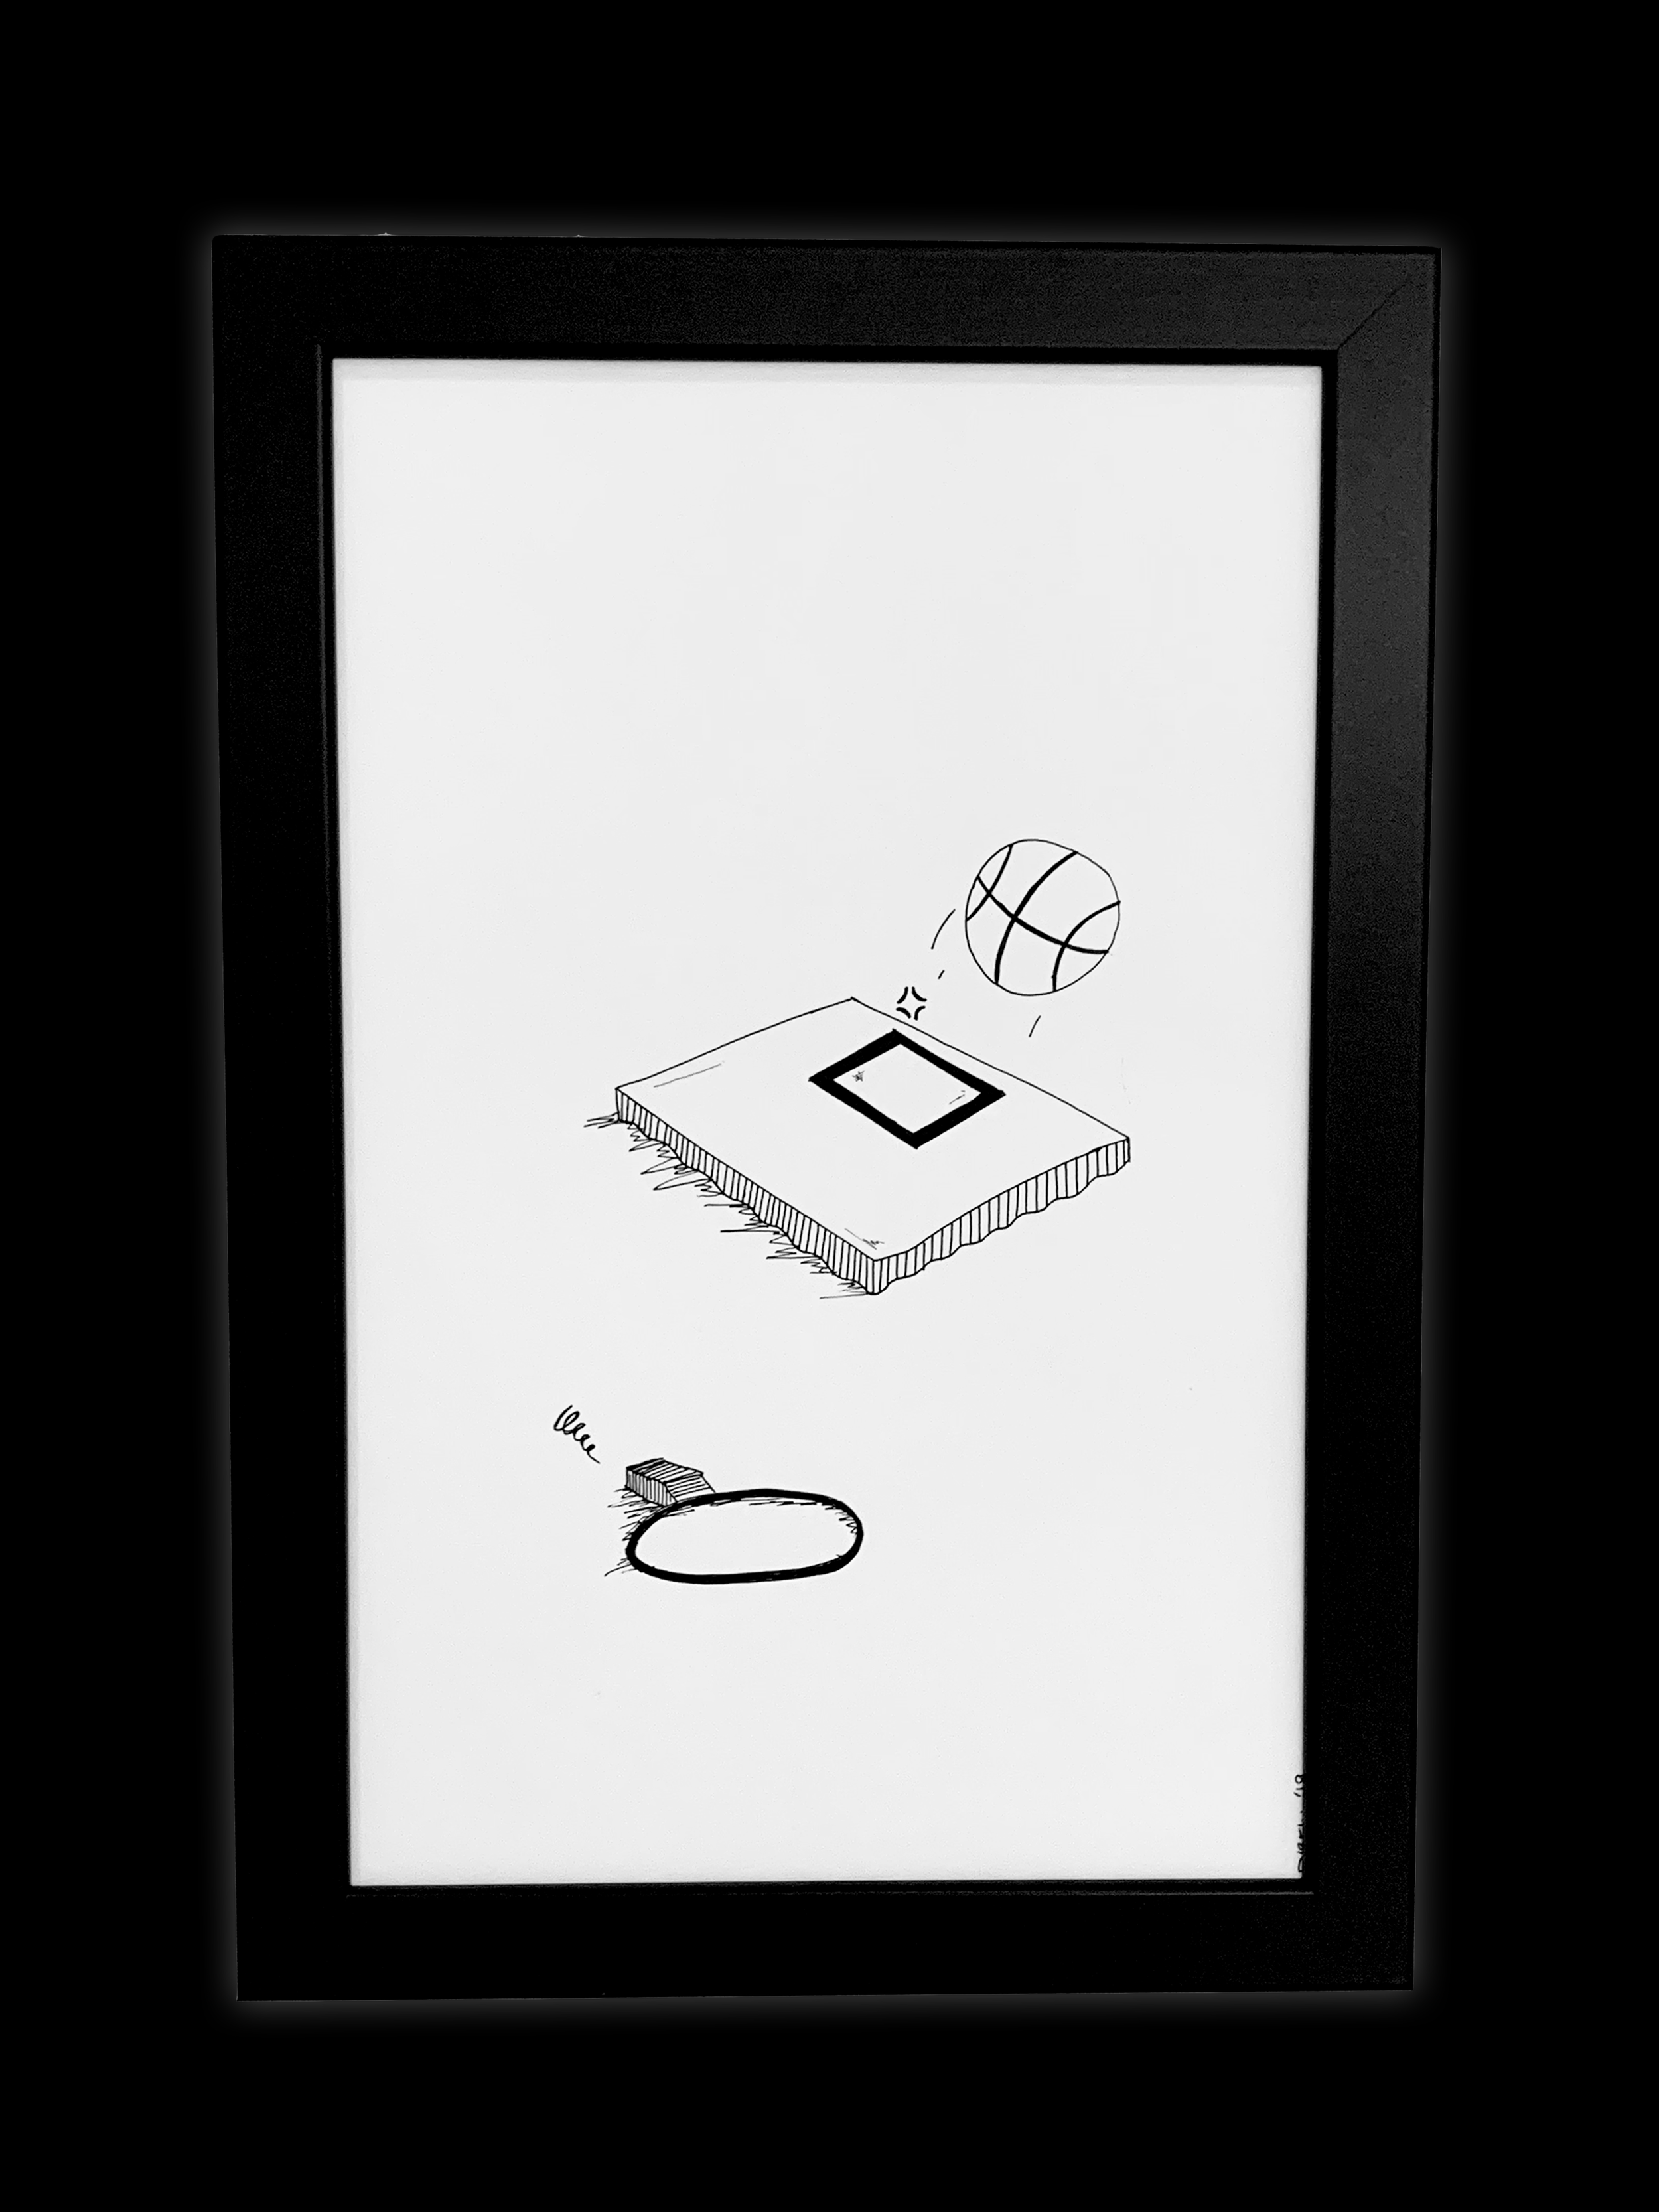 Framed Drawings_02.png